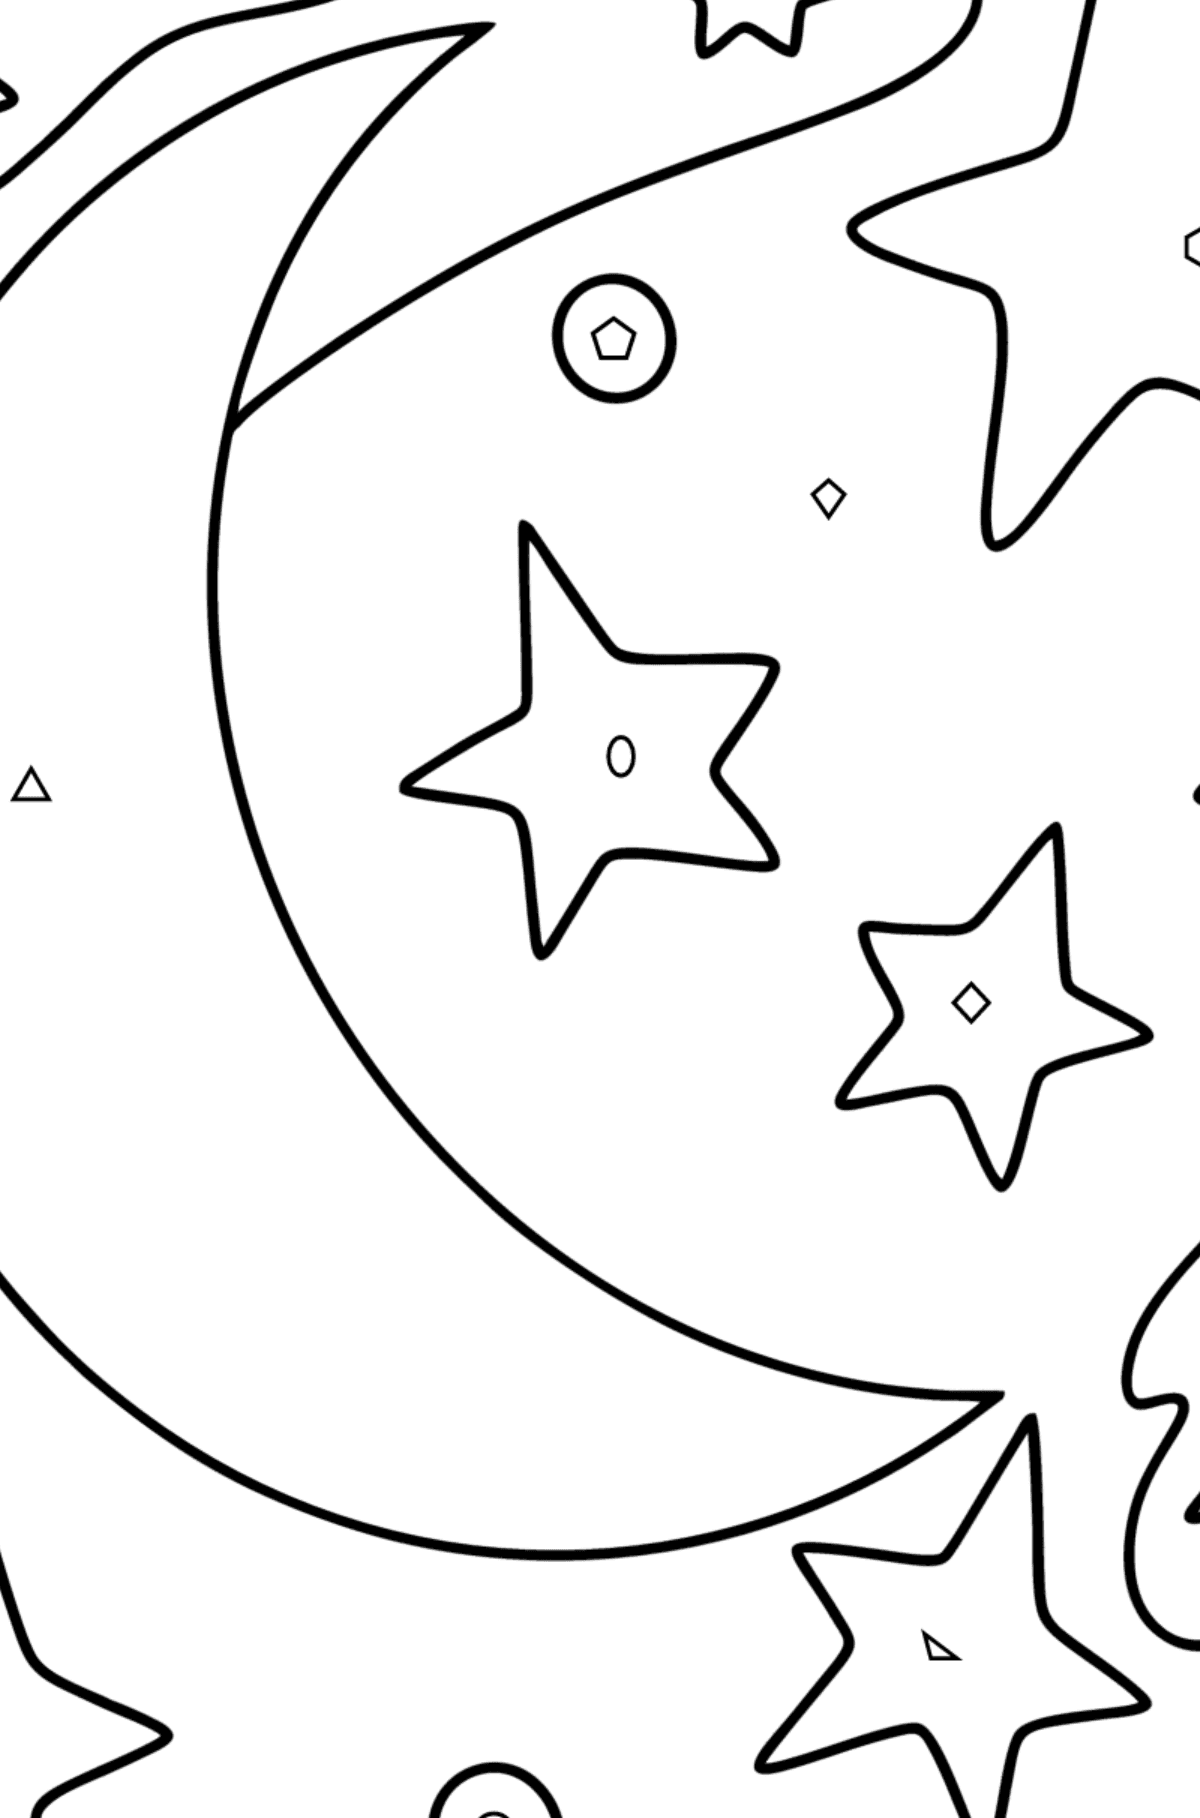 Coloring page moon and stars - Coloring by Geometric Shapes for Kids